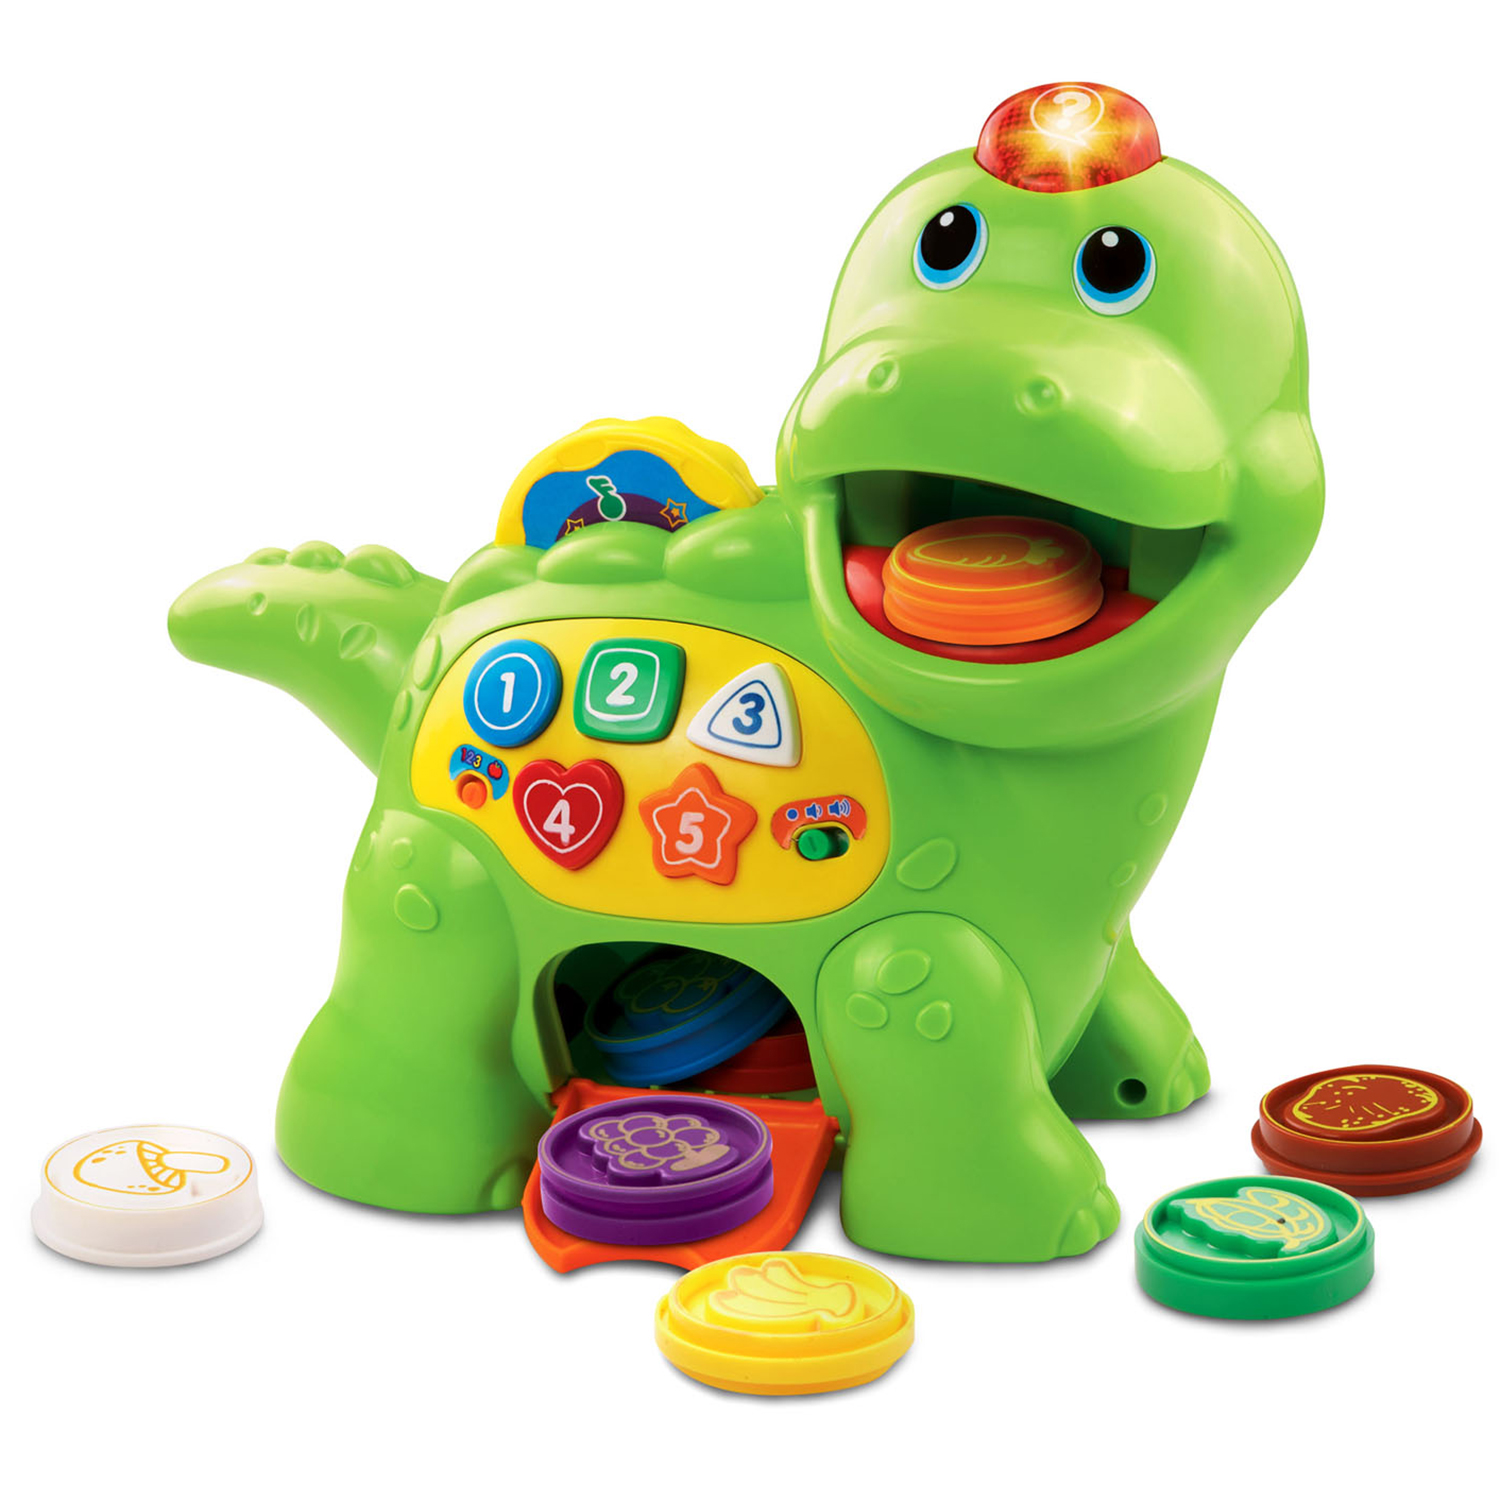 Best Toy for 12-Month-Olds: VTech Count and Chomp Dinosaur Learning Toy